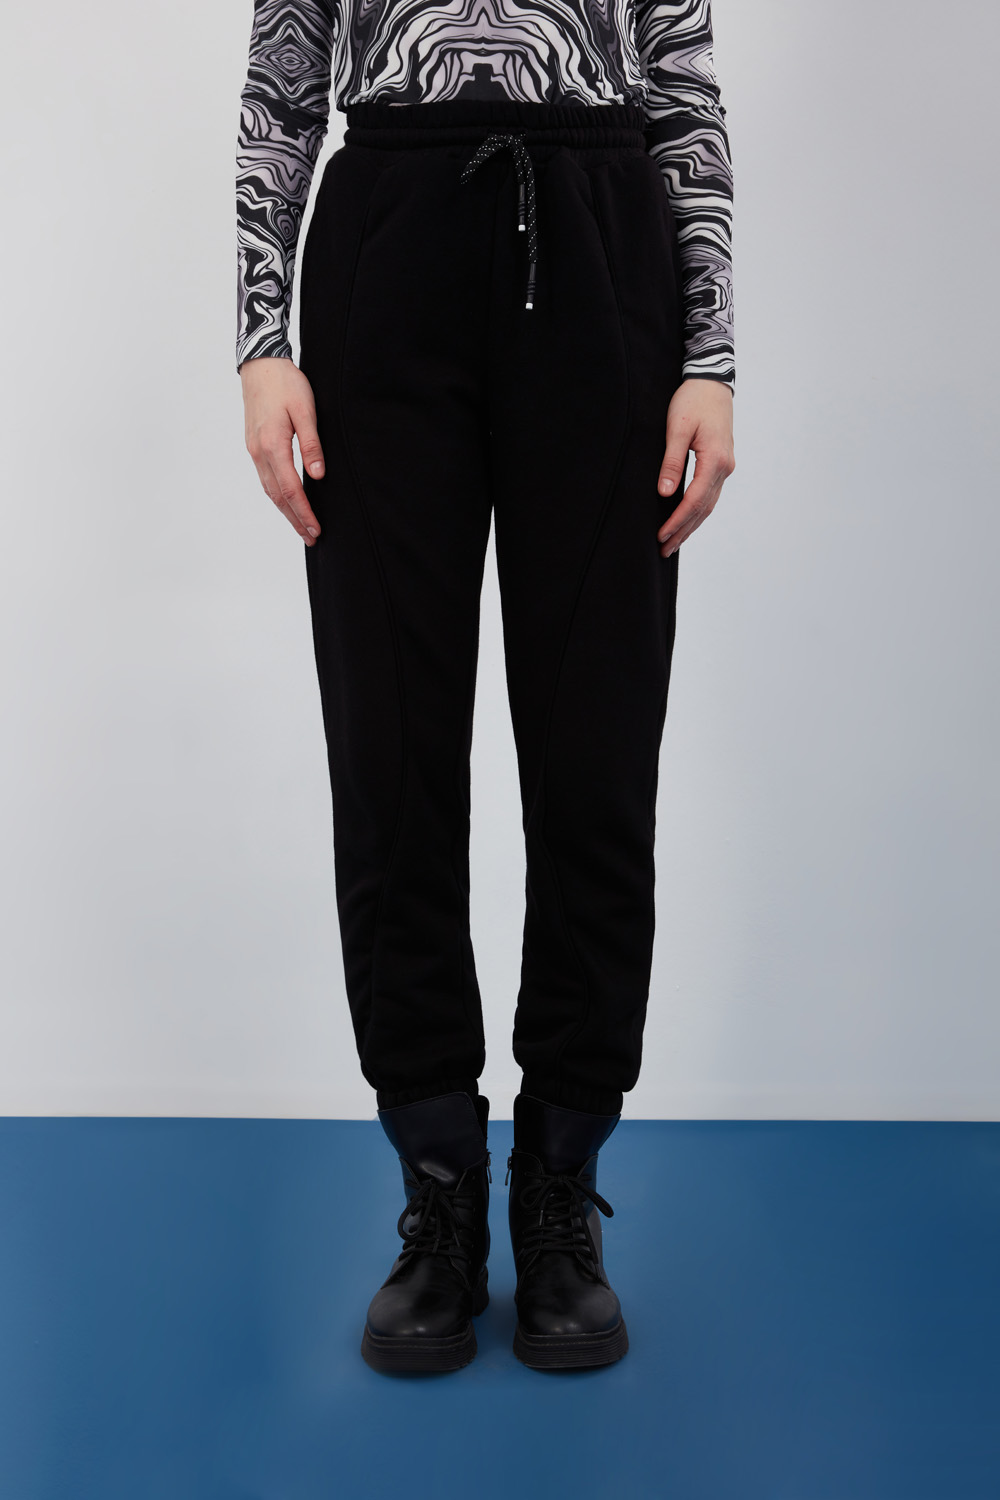 Elastic Waist Black Jogger Trousers with Stitches